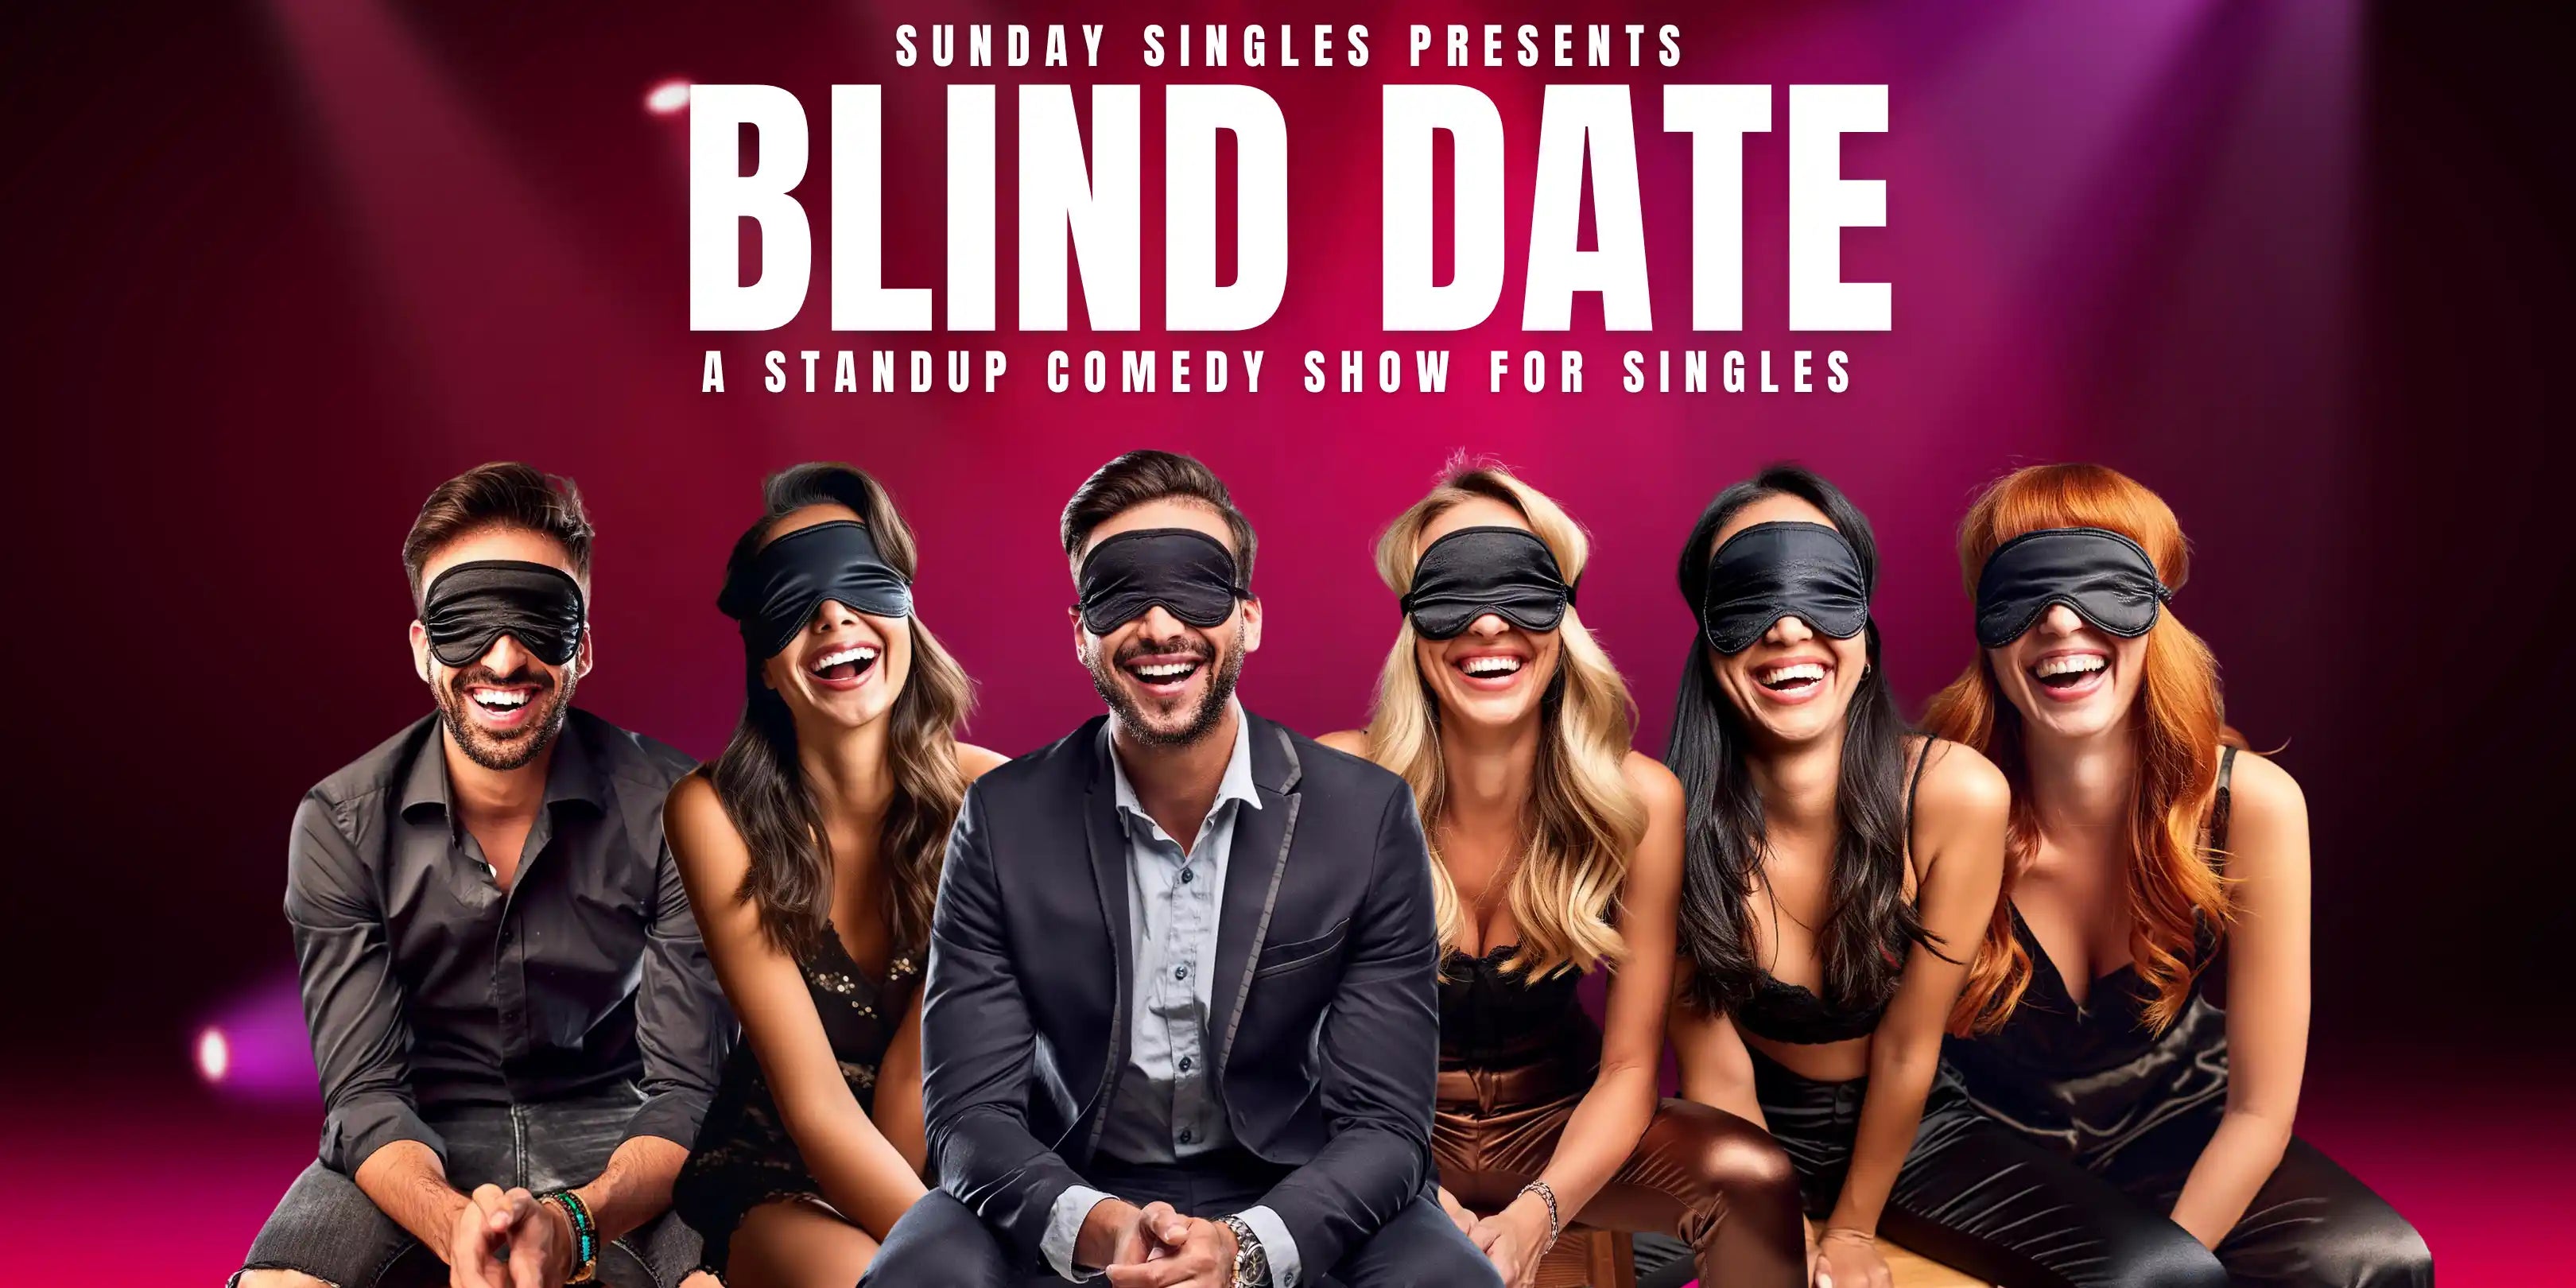 poster for Sunday Singles event in Australia where people meet other singles